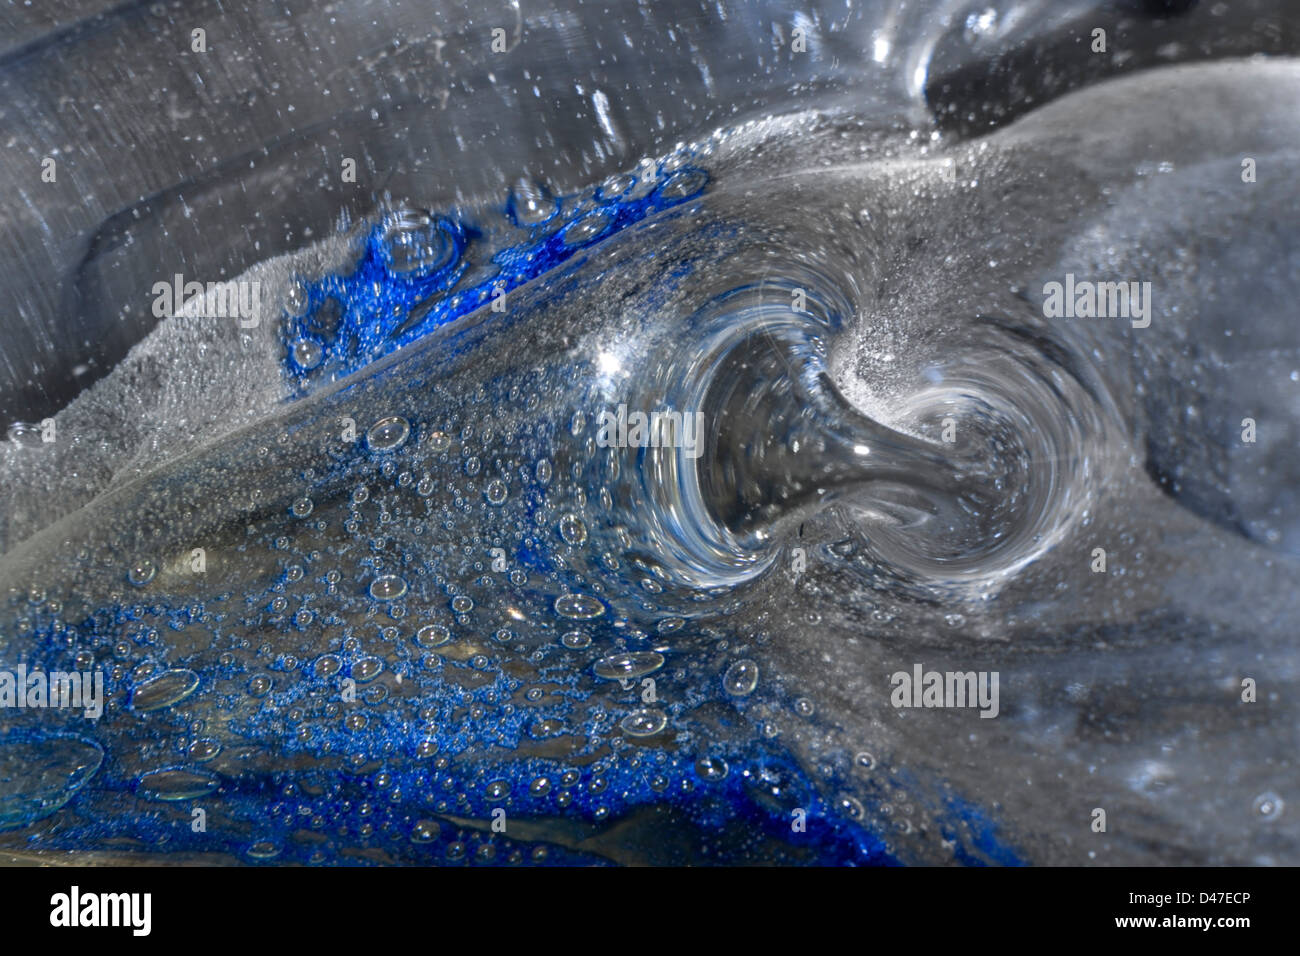 abstract detail of a glass sculpture looking like a surreal landscape Stock Photo